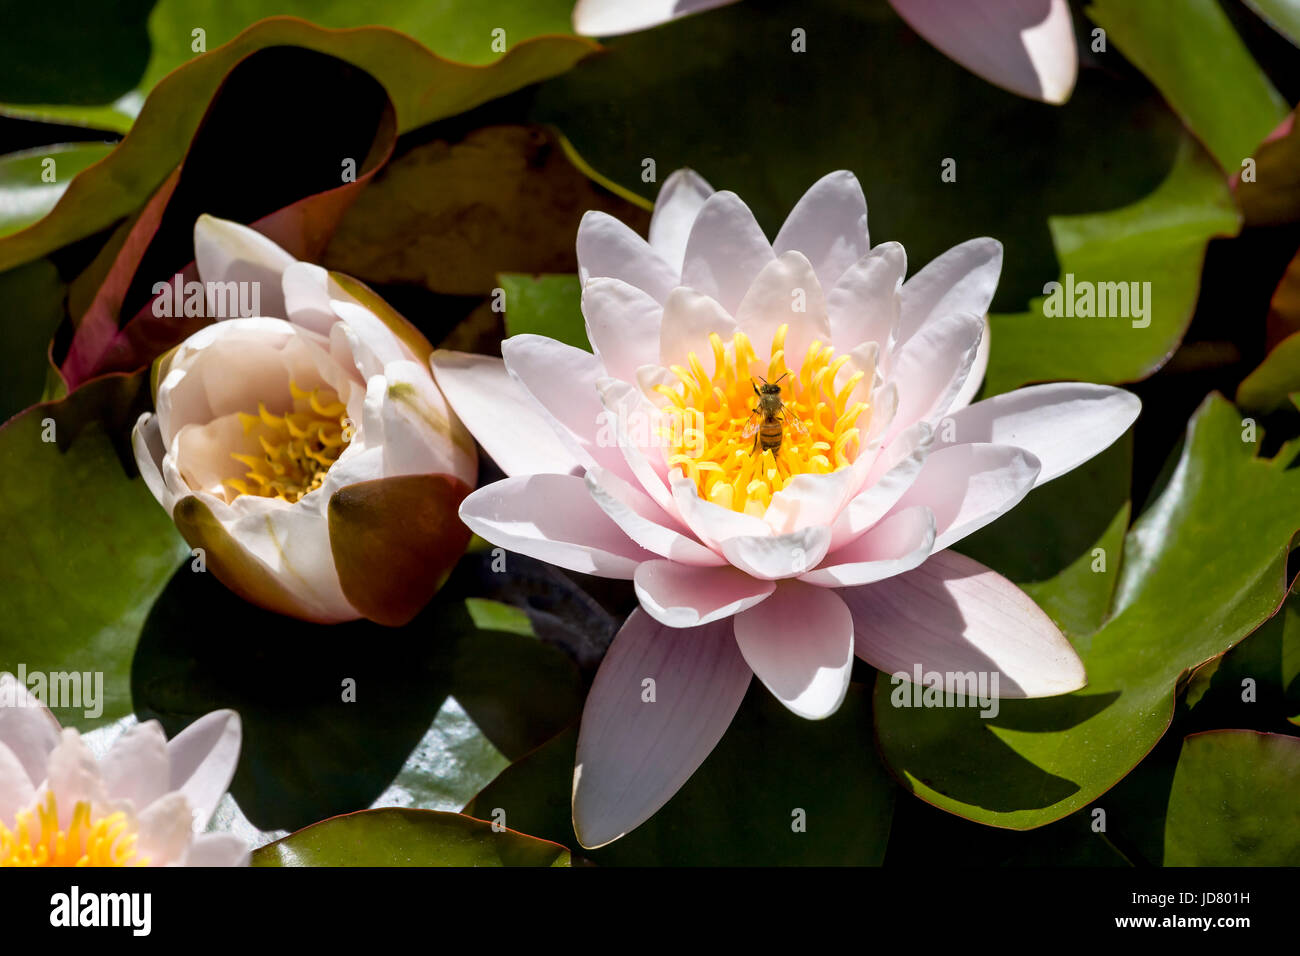 This is an image of a honeybee collecting pollen on a lotus in a lily pond. Captured a formal garden in San Francisco, California. Stock Photo